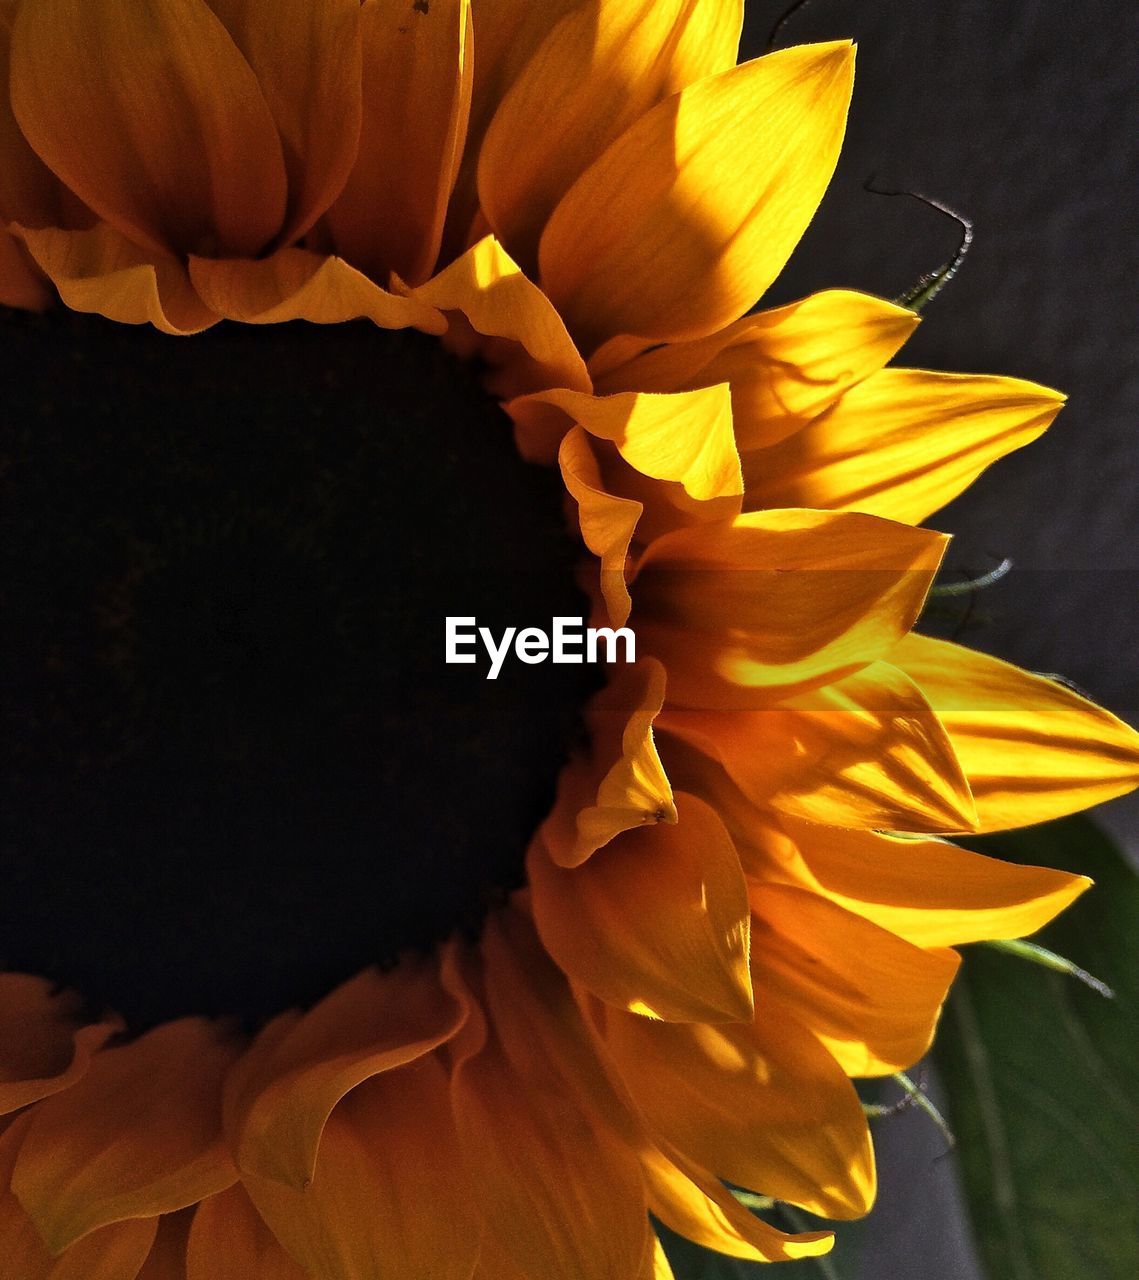 Close-up of sunflower growing on field